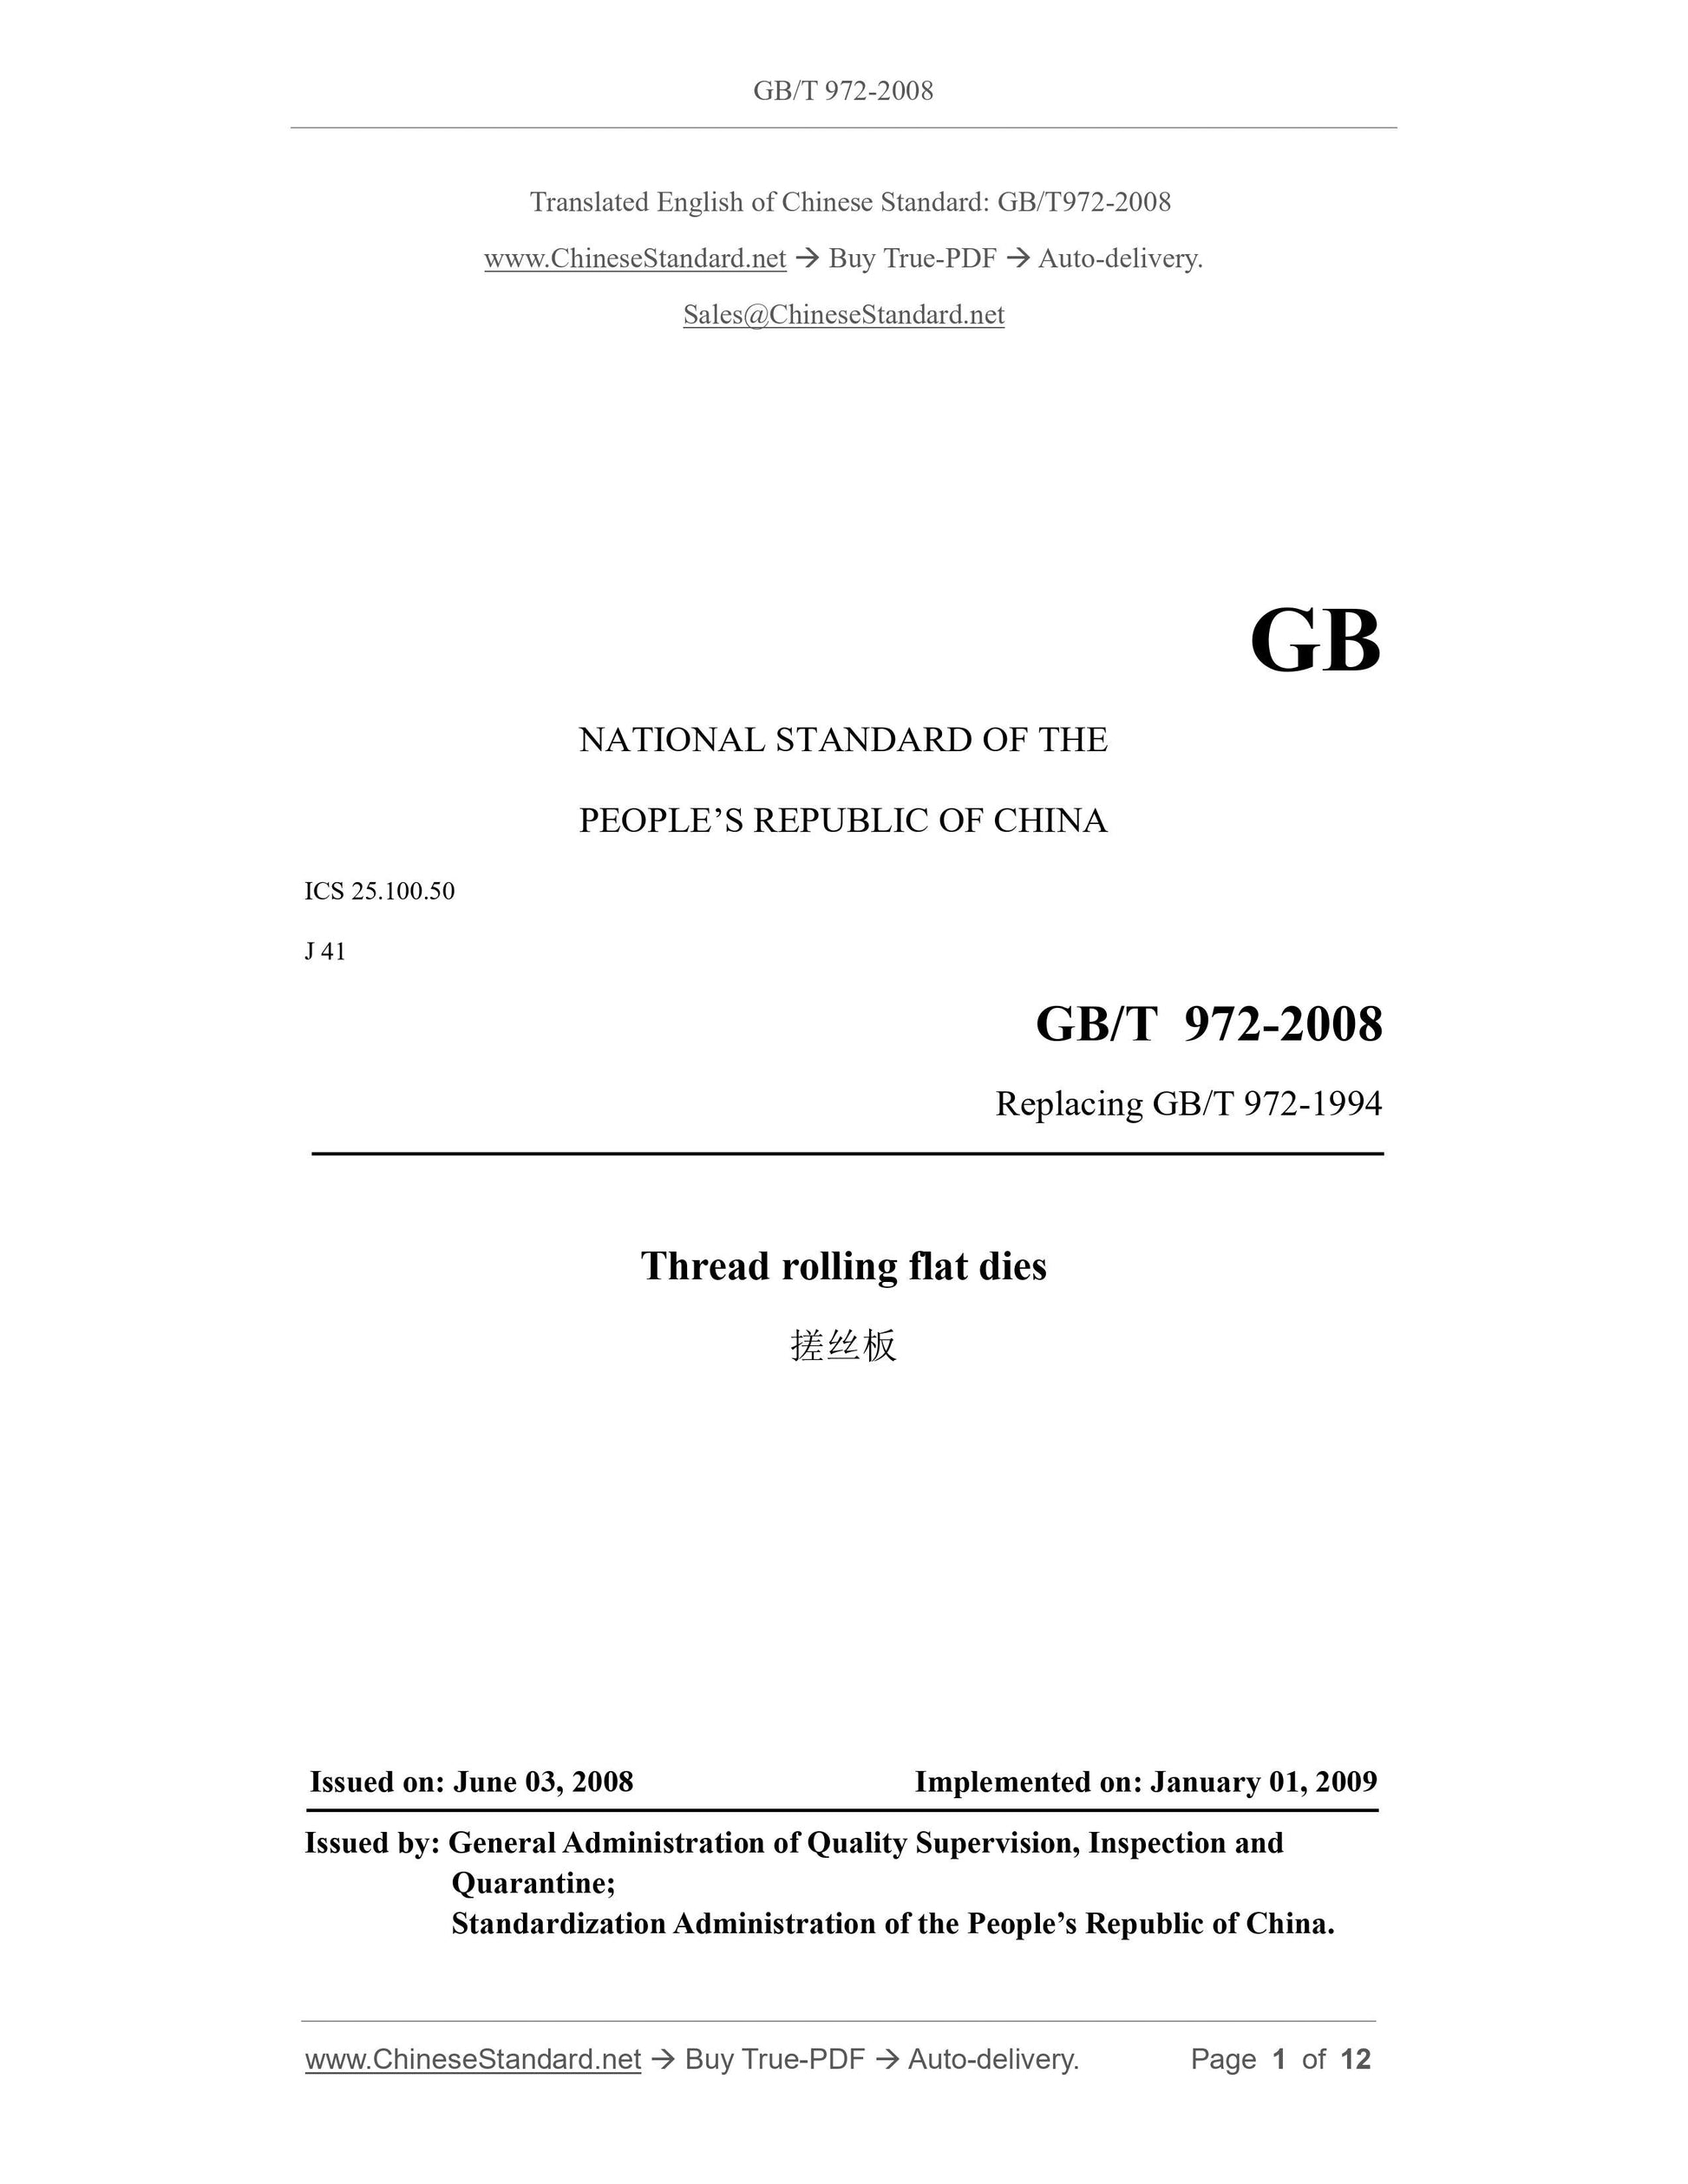 GB/T 972-2008 Page 1